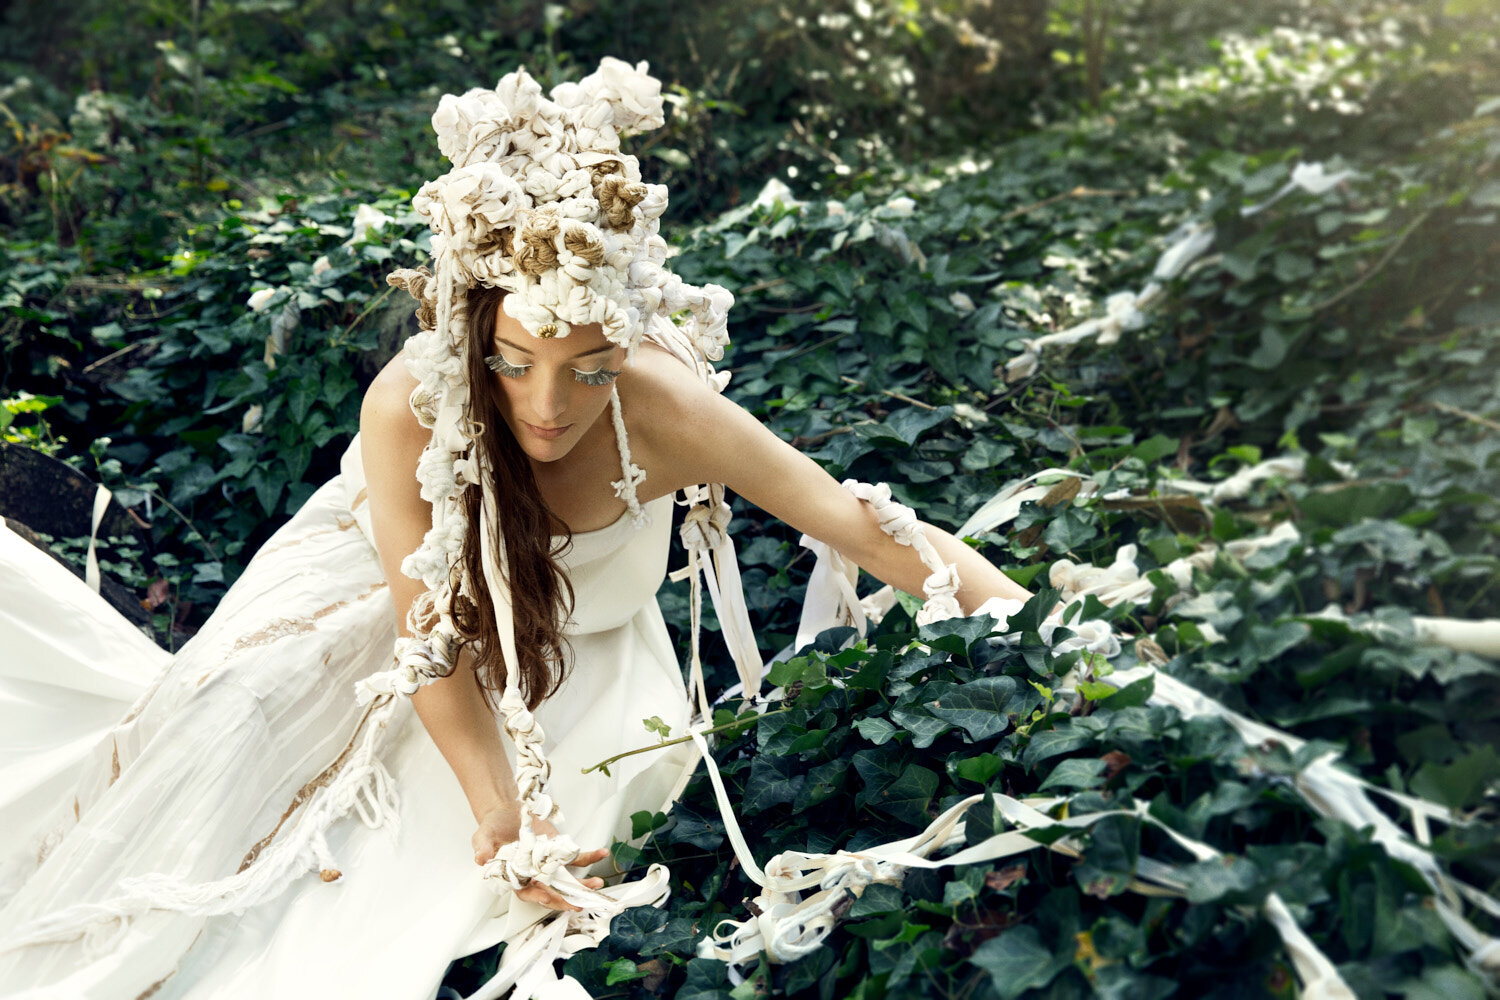 woman wearing knotted headpiece rising from ivy covered ground; conceptual fashion editorial by photographer Hanna Agar